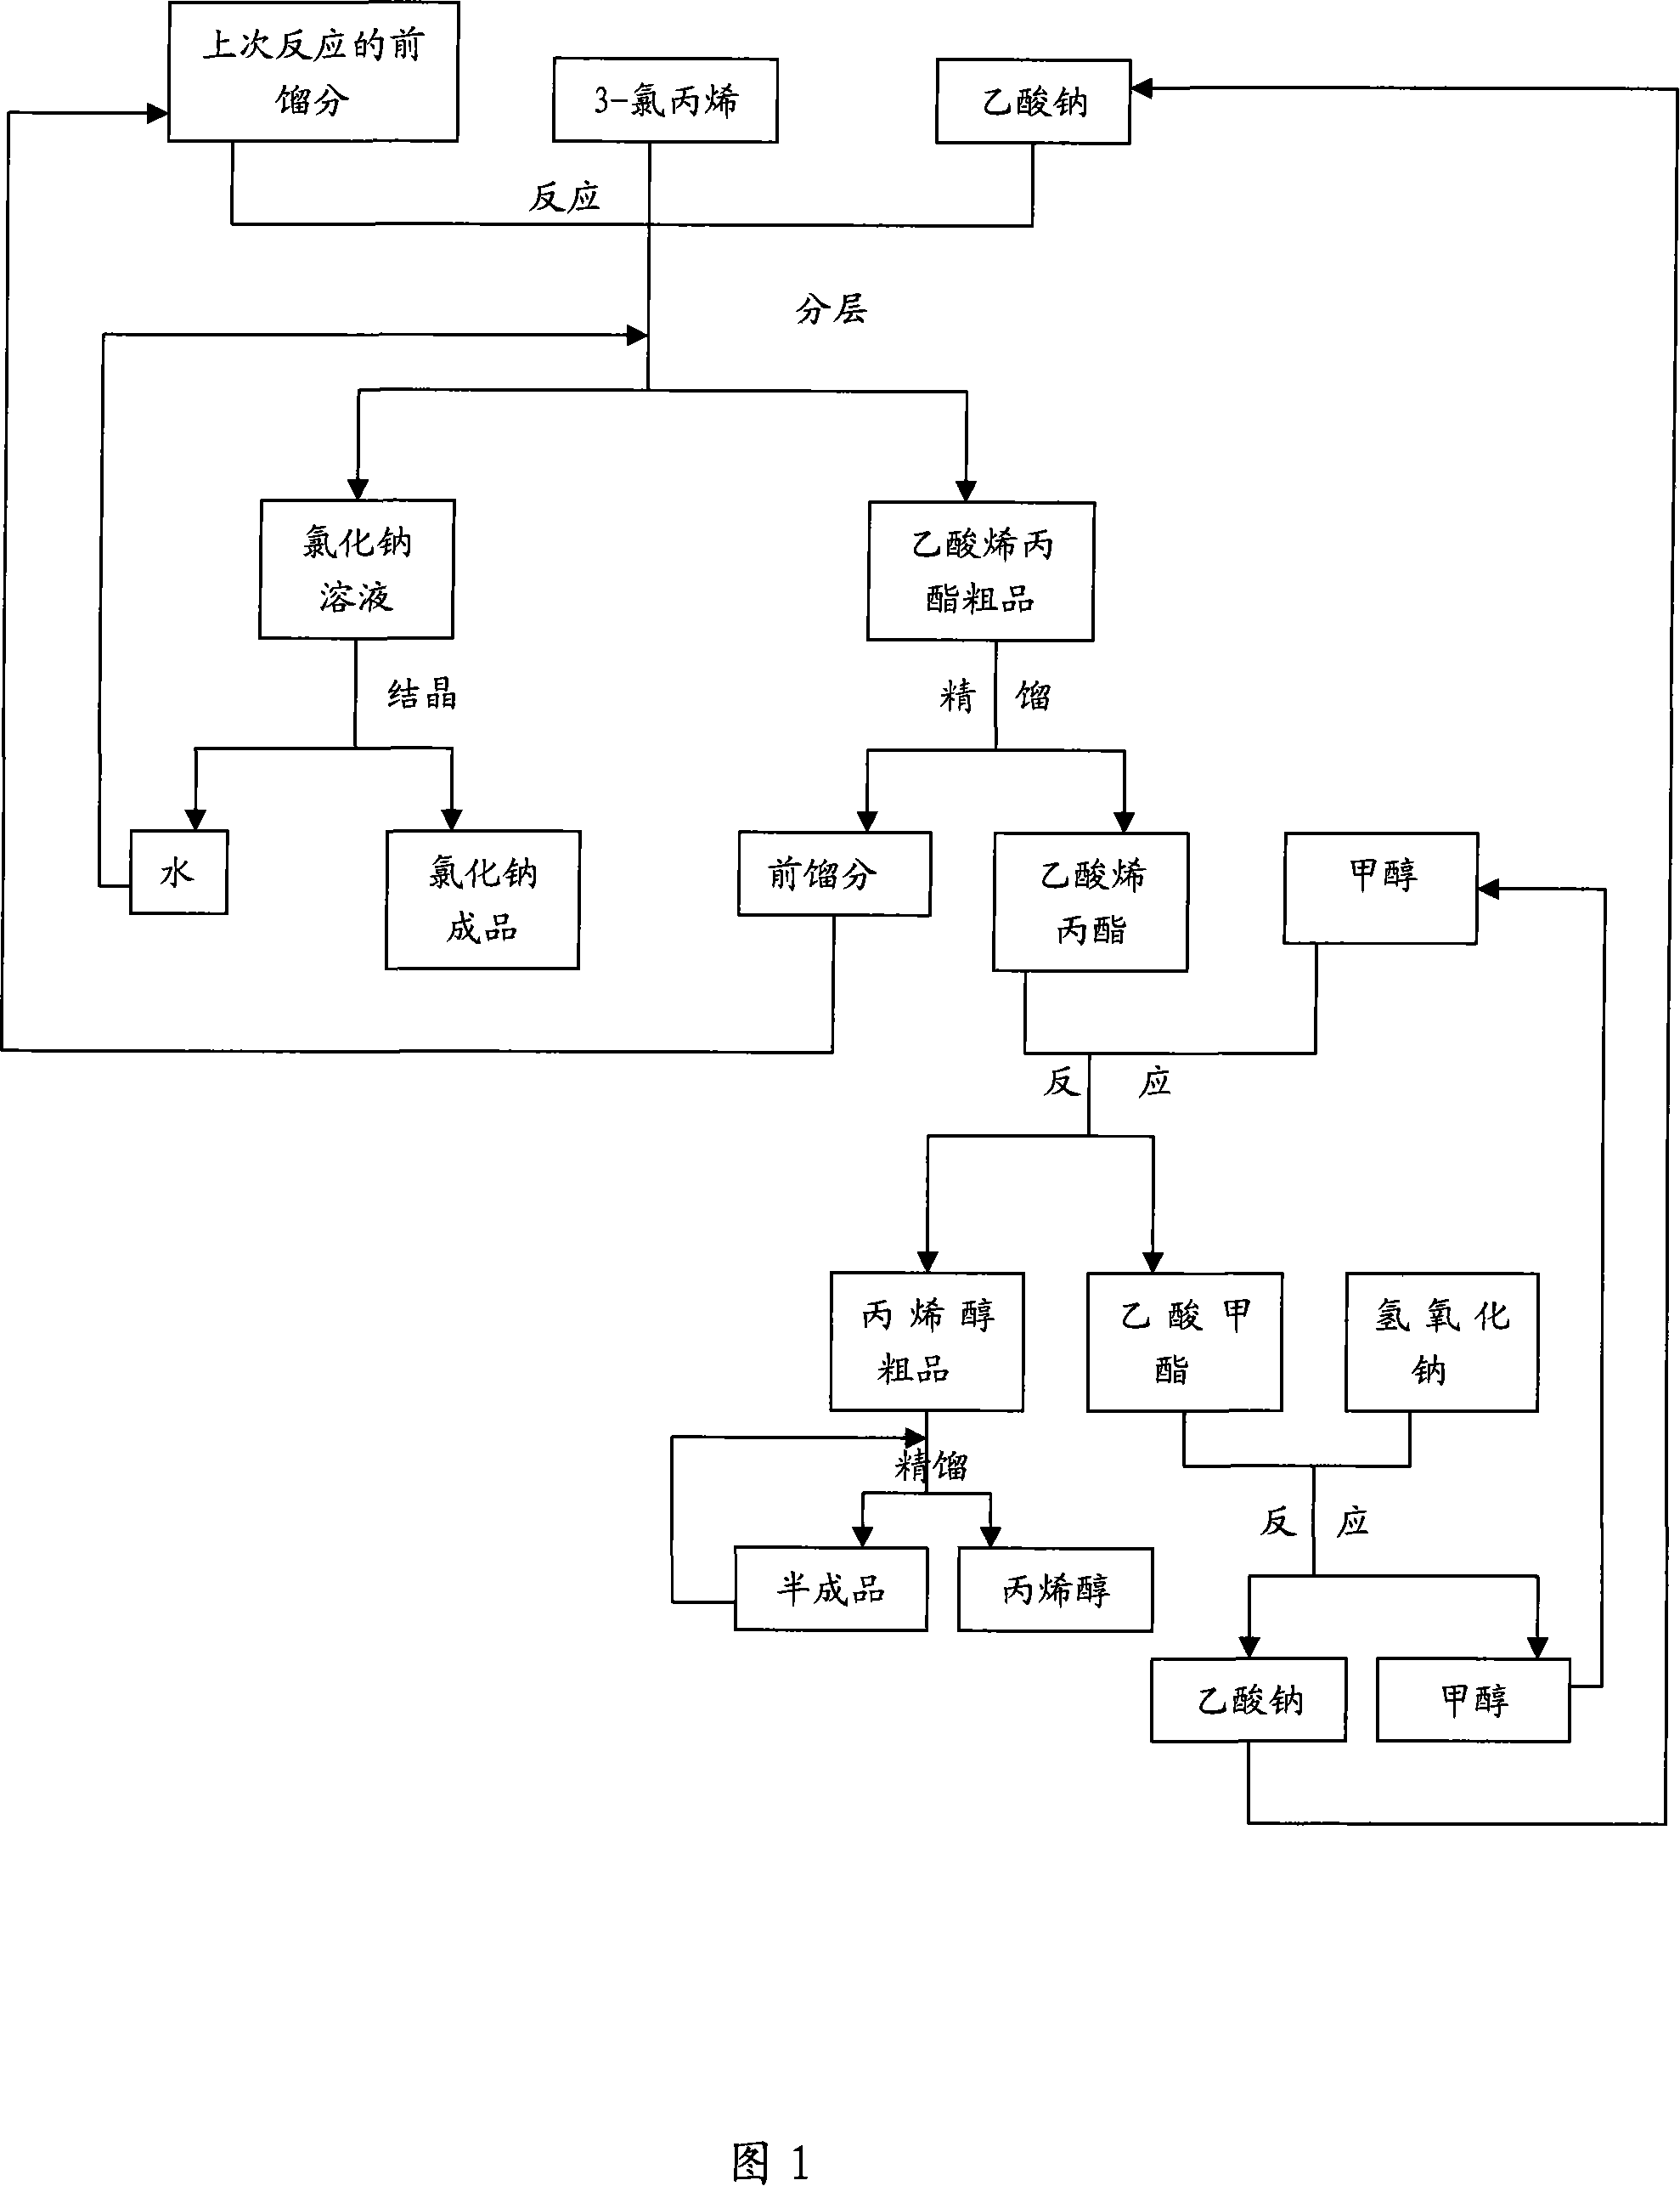 Method for producing propenyl alcohol